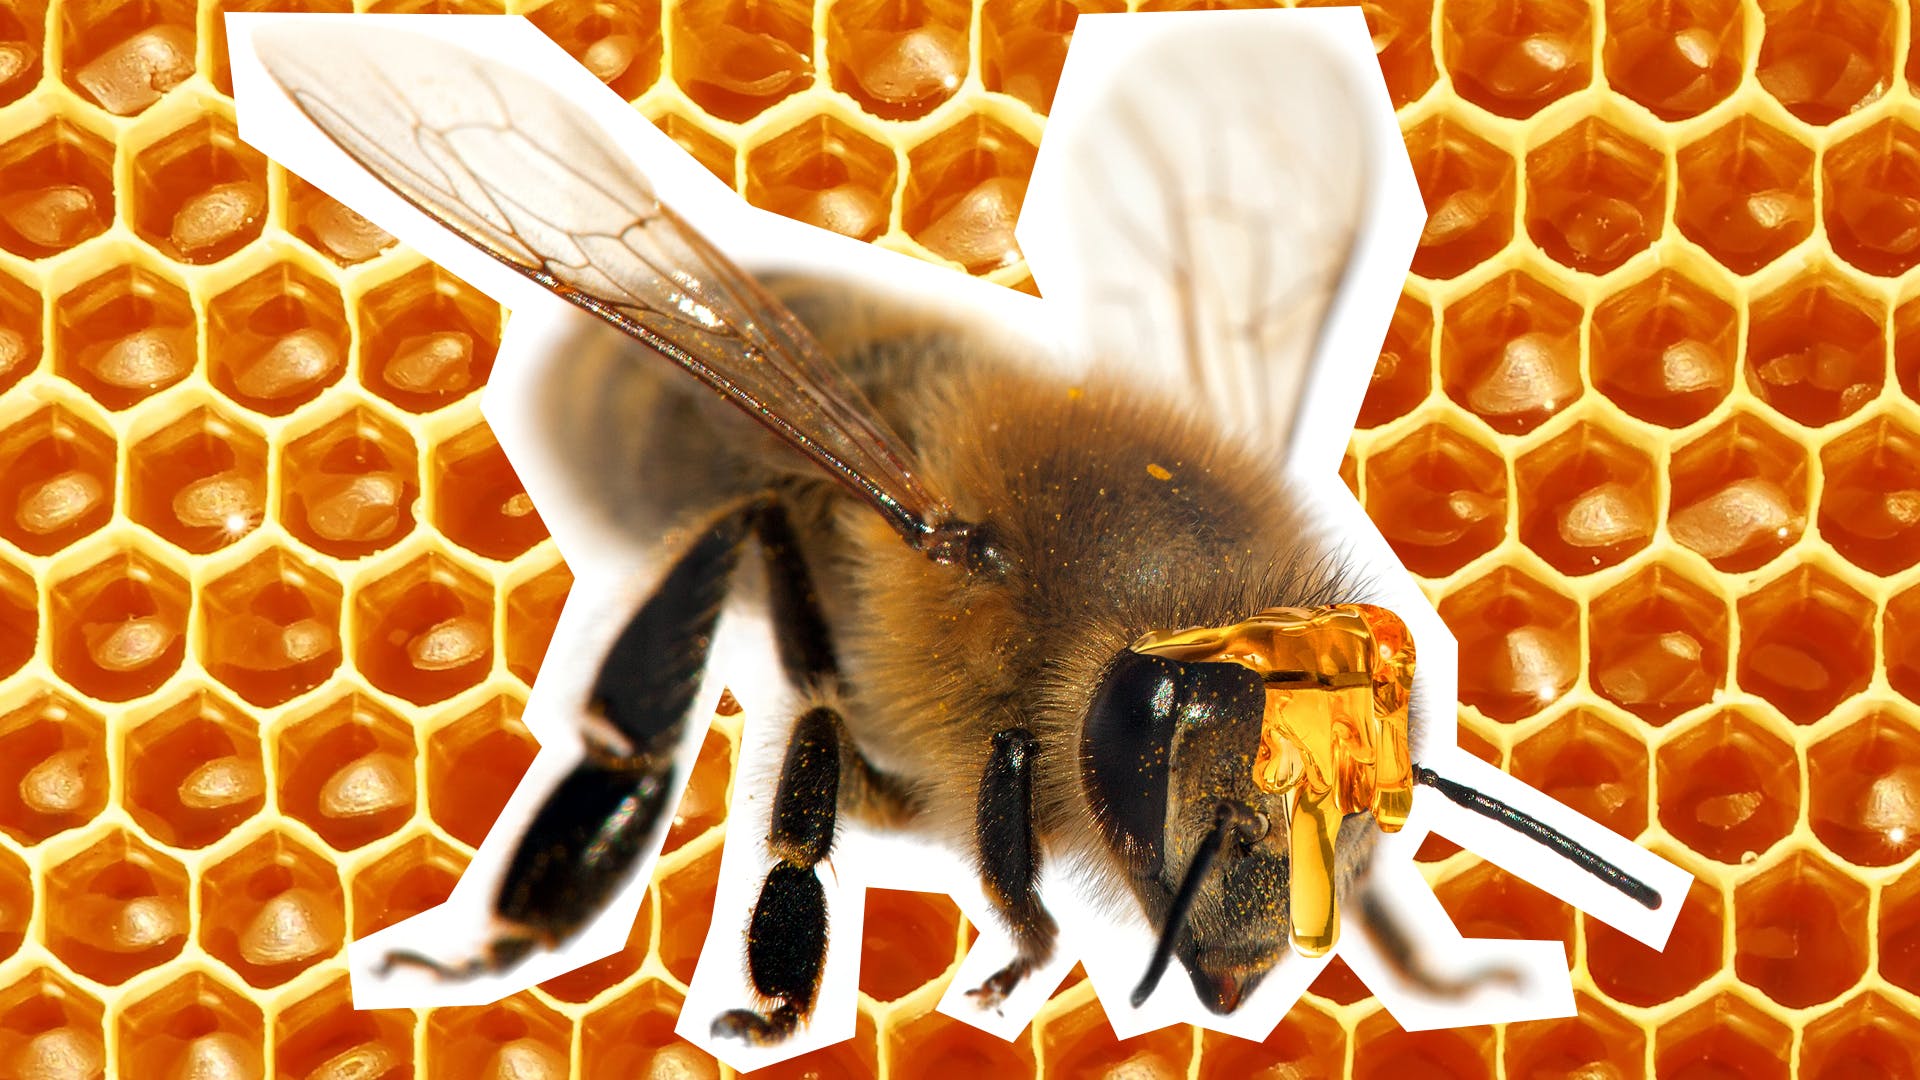 A bee on a honeycomb background. Why do bees have sticky hair? | Why was the bees hair sticky?